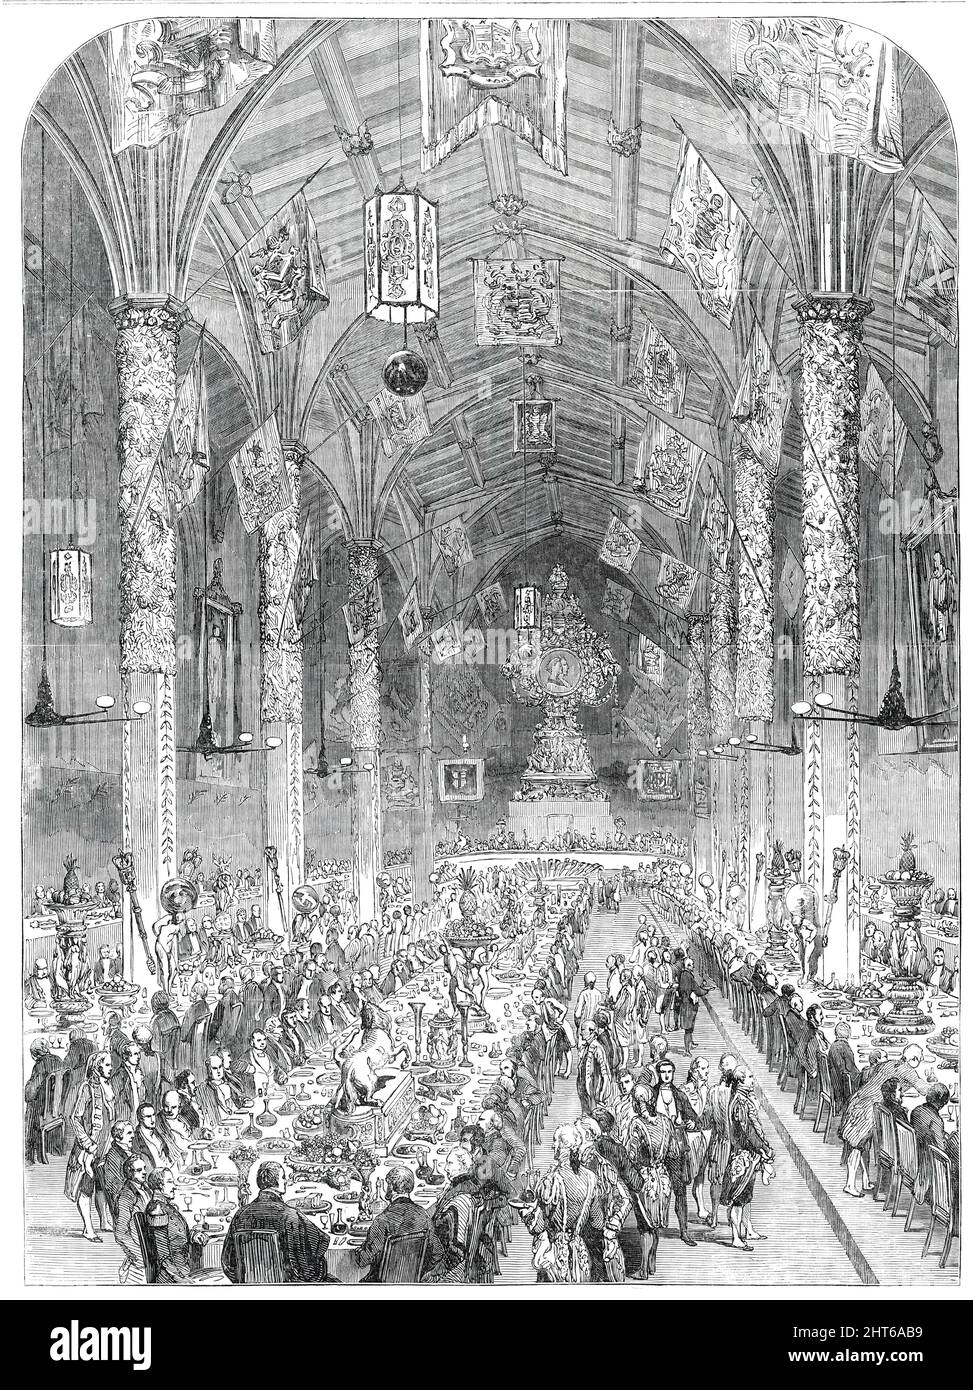 The Banquet in the Guildhall at York, 1850. 'At seven o'clock, his Royal Highness Prince Albert, accompanied by the Lord Mayor of York, entered the hall amidst loud cheers from the assembled company. His Royal Highness appeared to be much struck with the magnificent coup d'oeil...After grace had been pronounced at the close as at the beginning of the banquet by the Rev. Canon Trevor, &quot;the loving cup&quot; was passed round, after the customary greeting delivered in the name of the Lord Mayor to all his guests, in the usual civic fashion, by Mr. Harker, the London toastmaster, and a flouris Stock Photo